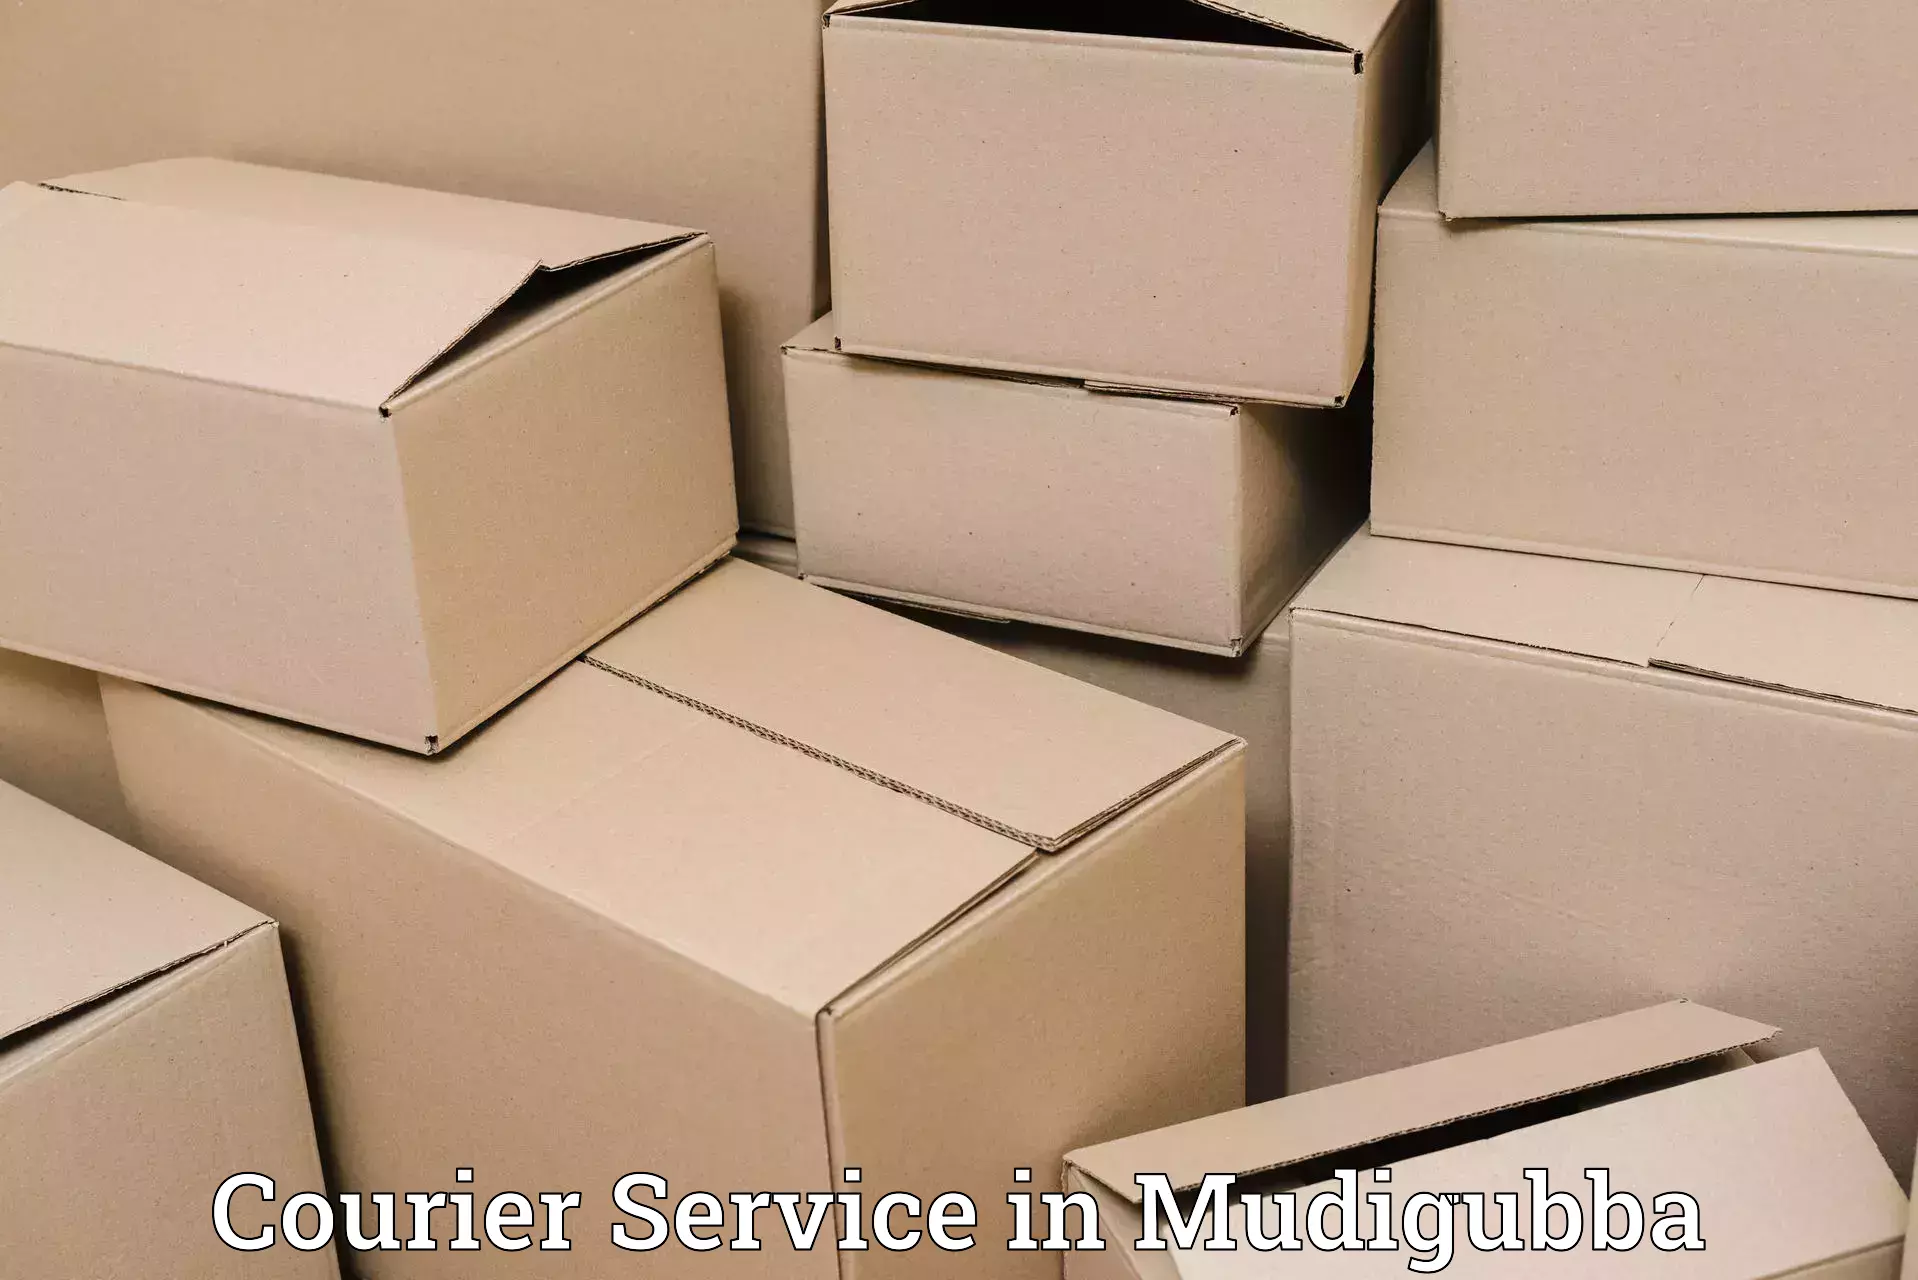 Parcel delivery automation in Mudigubba